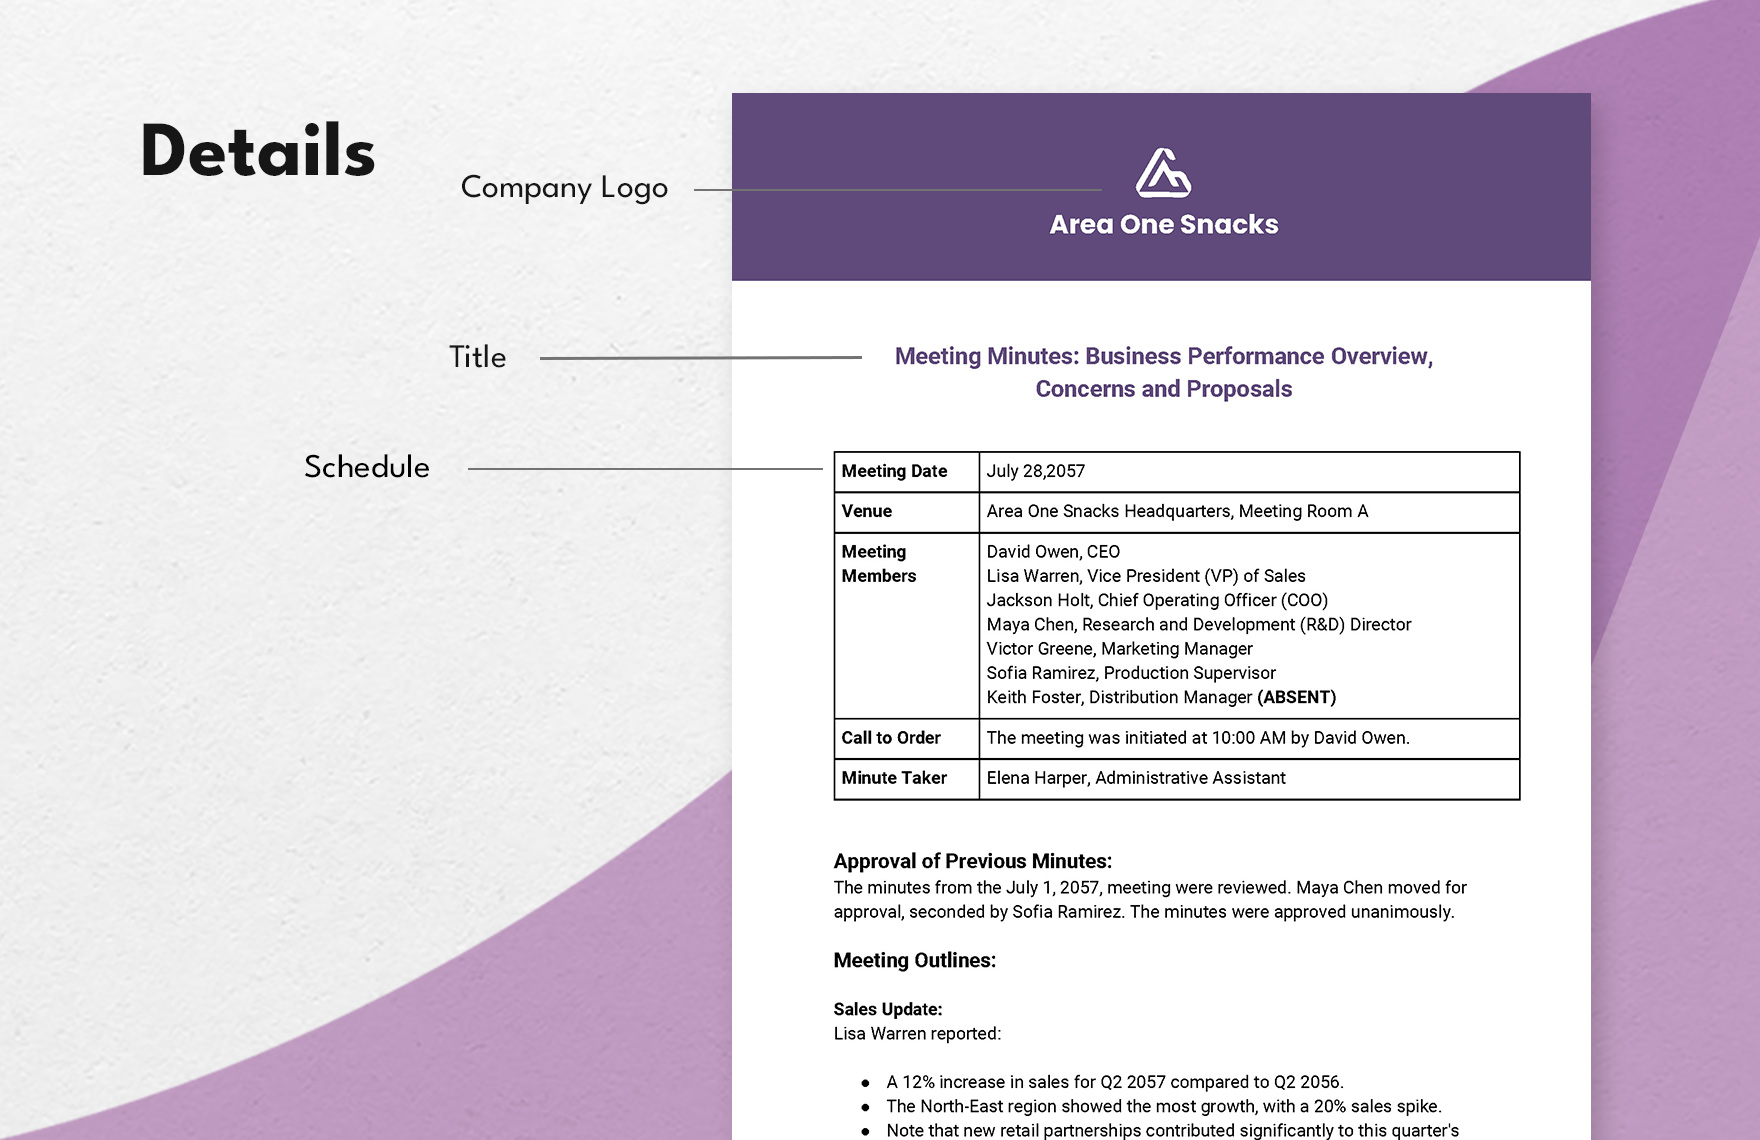 Meeting Minutes Example Template